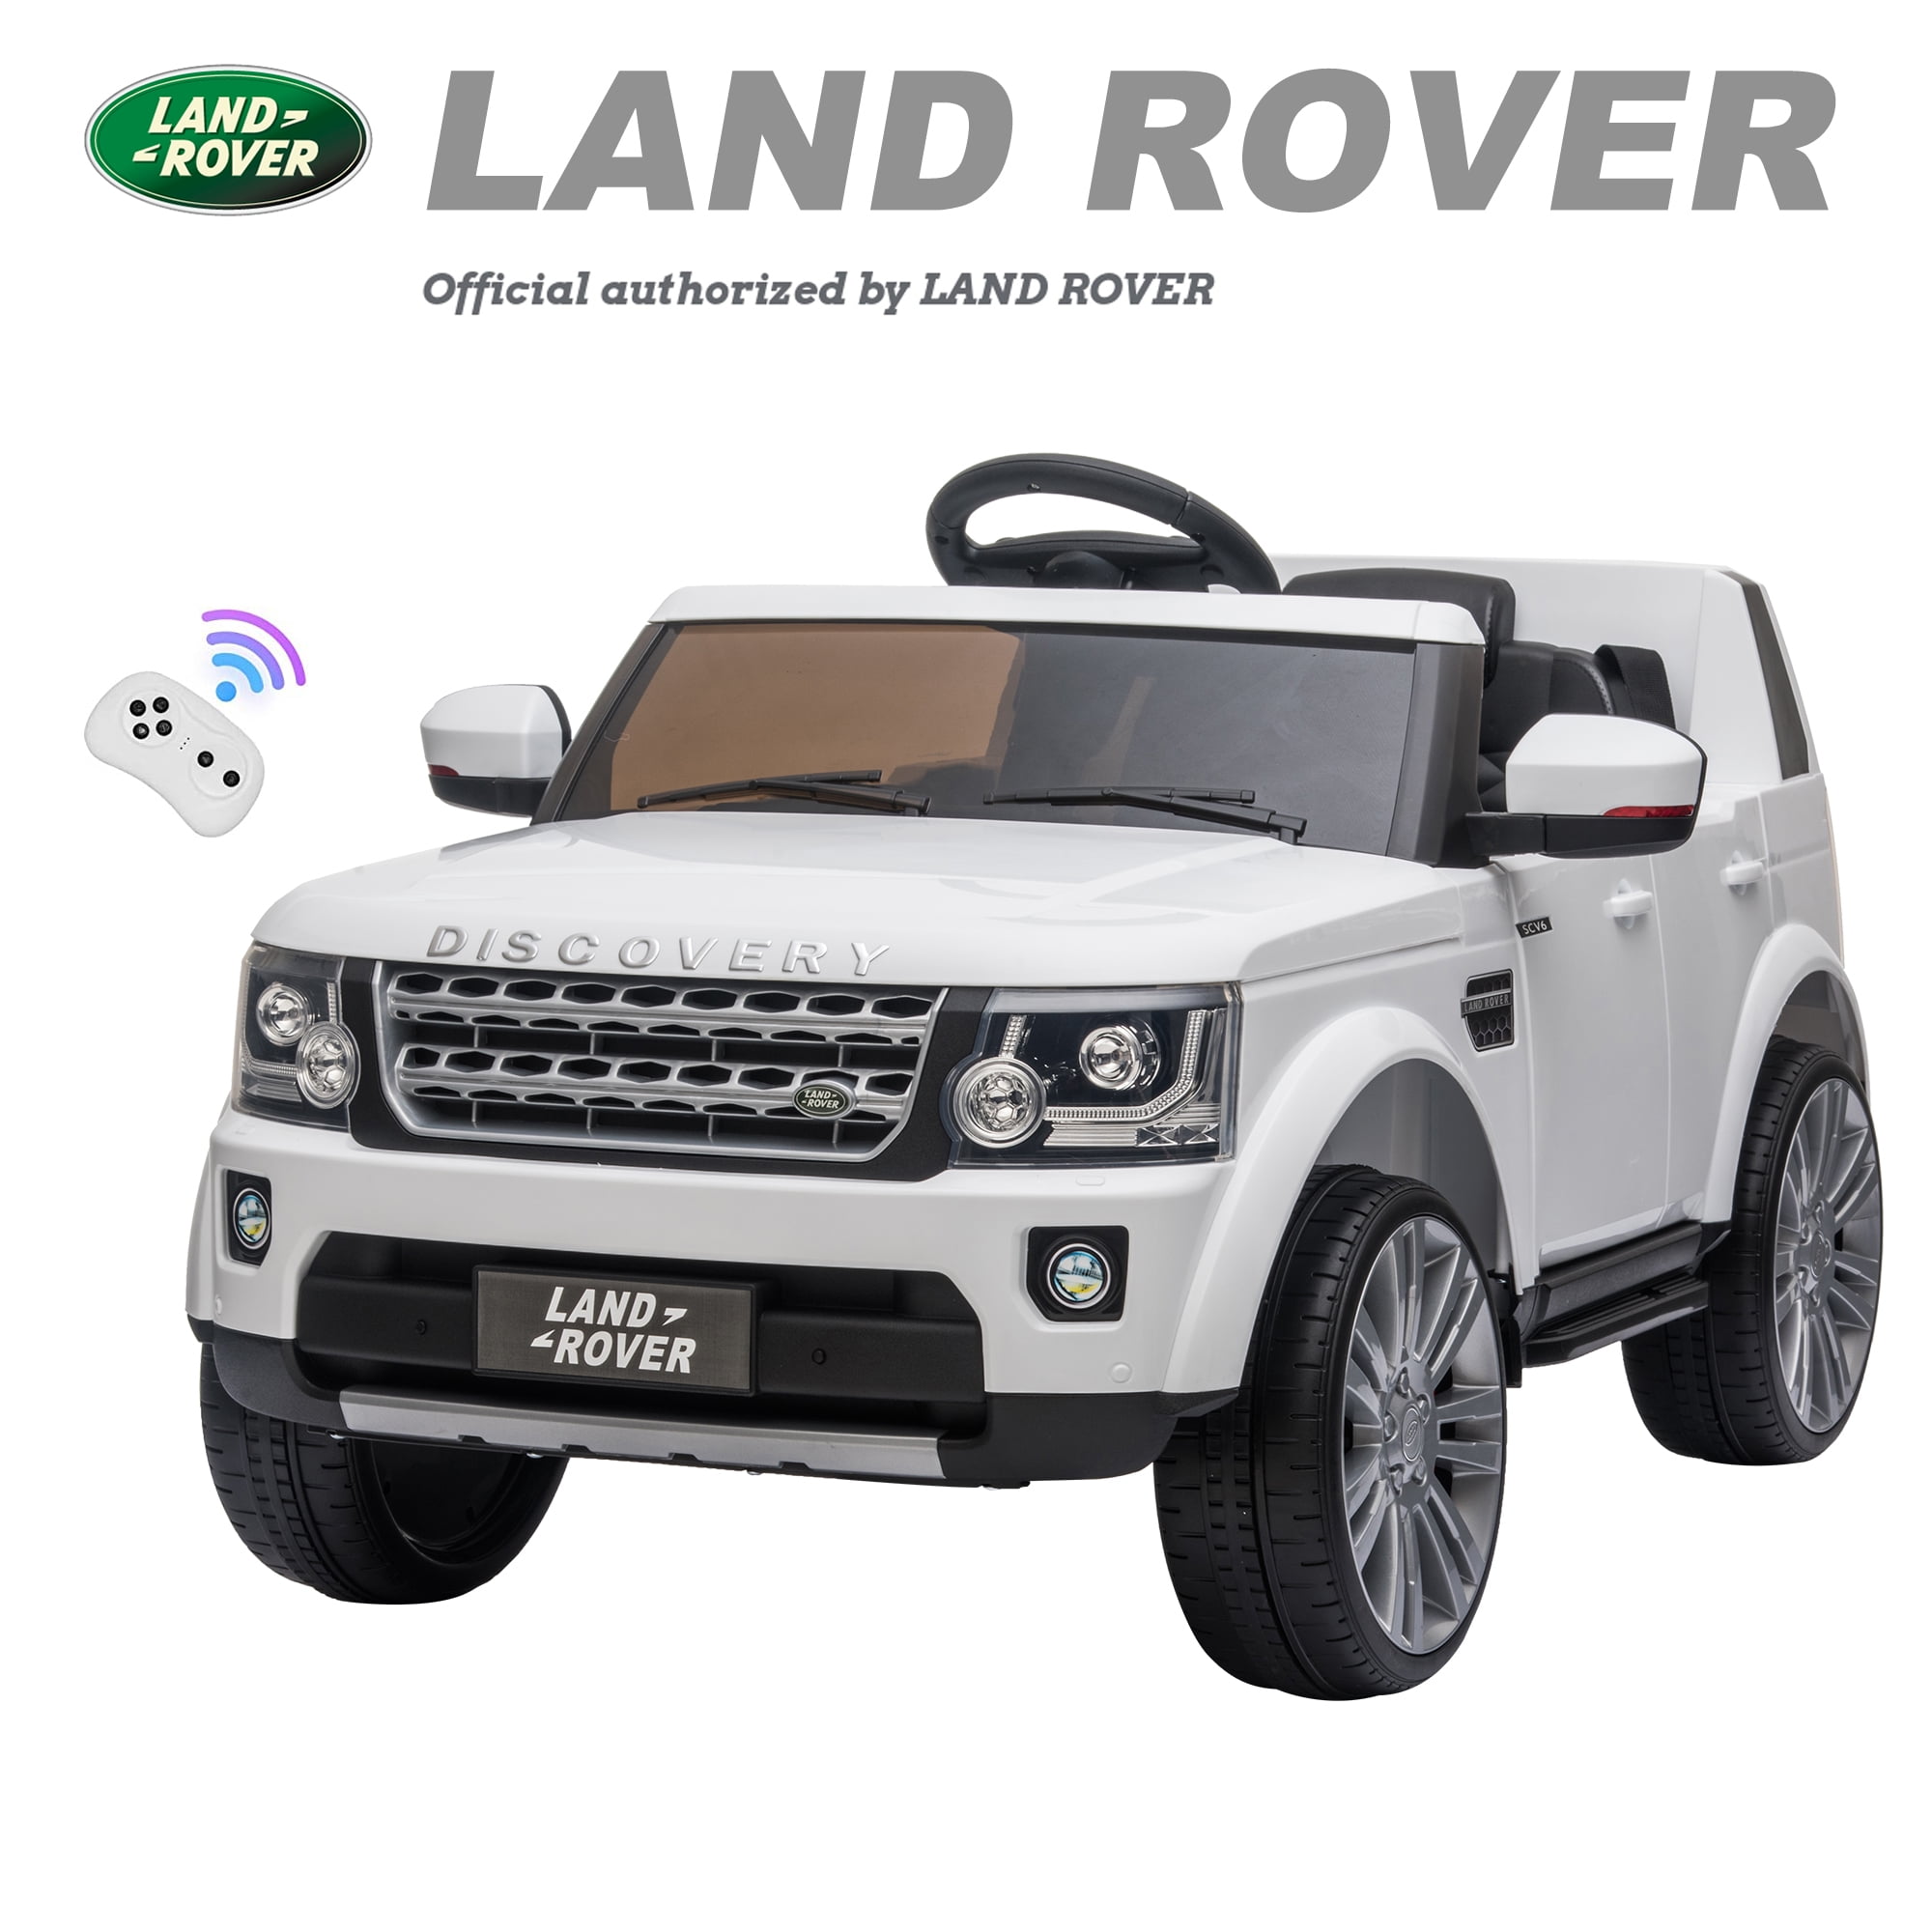 Details about   Kids Ride On Car Truck Landrover SUV Electric Toy Vehicle w Remote Control 